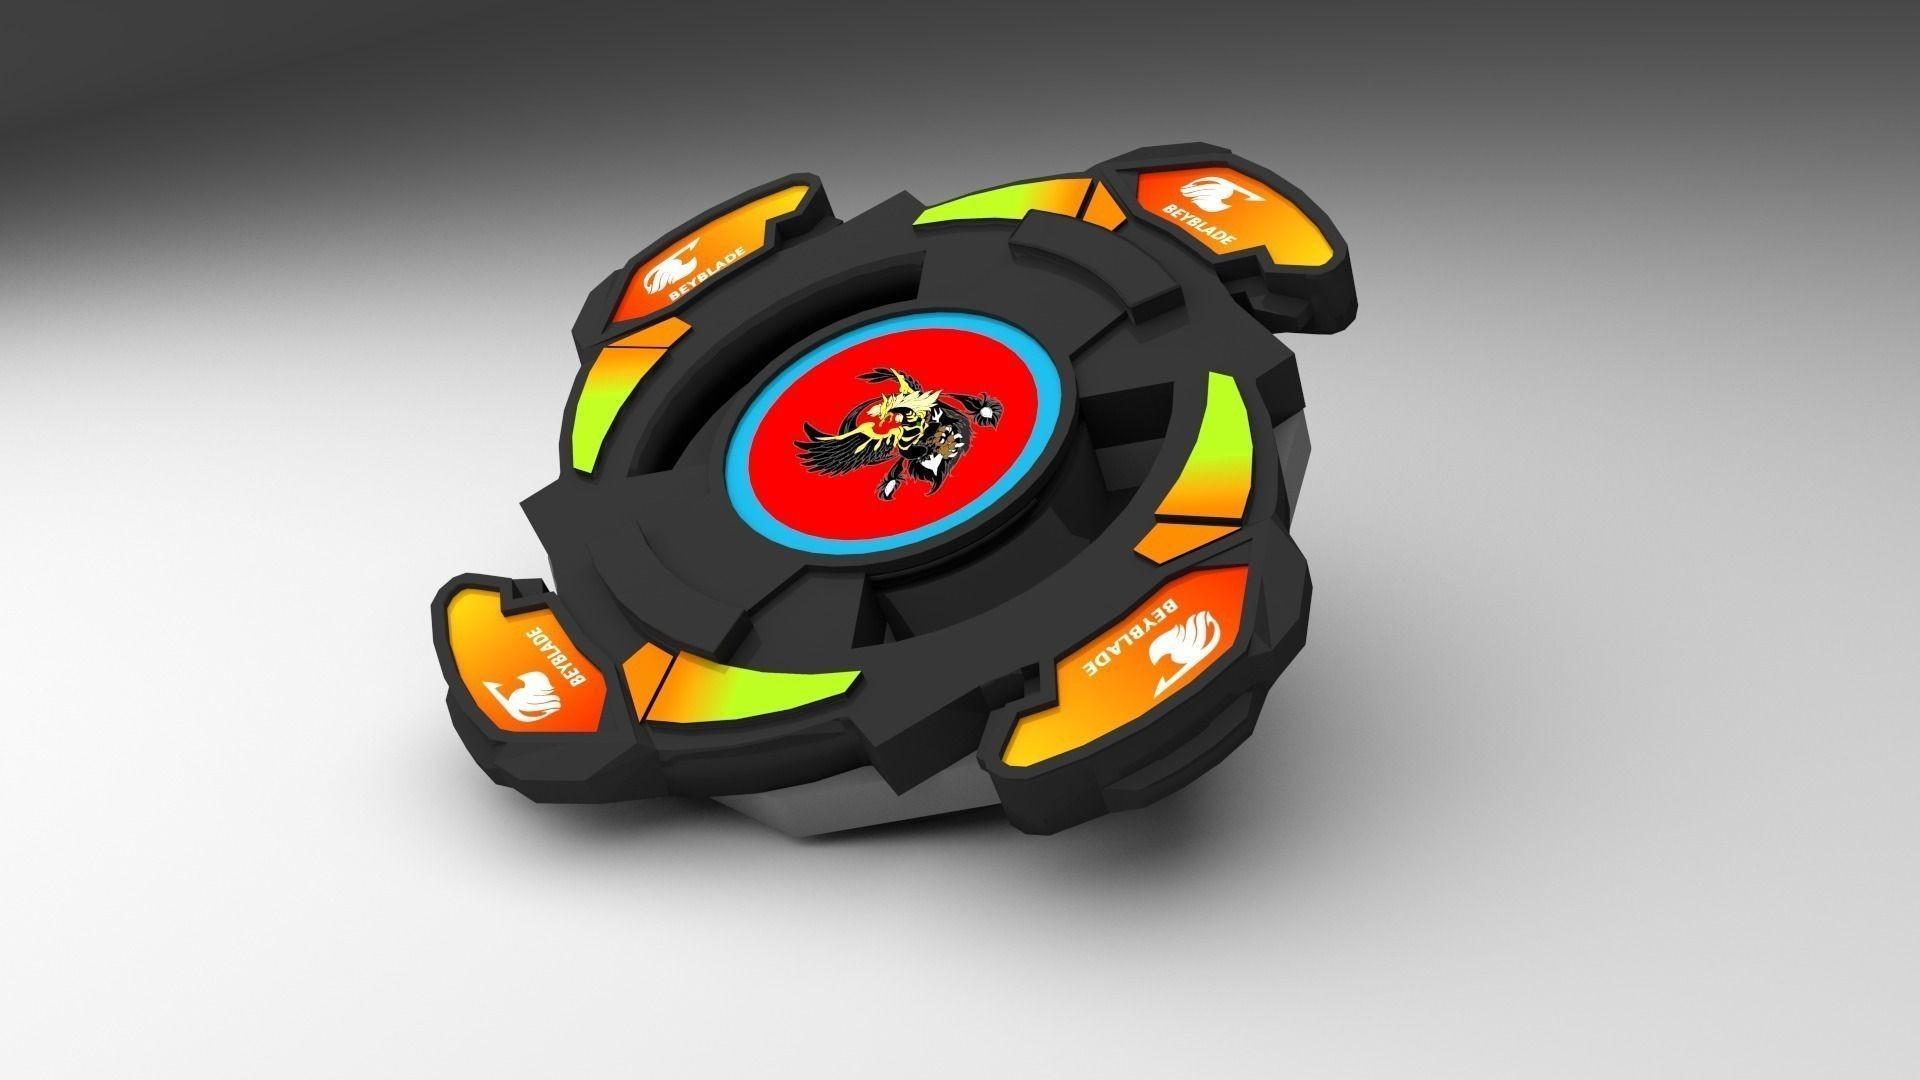 Beyblade HD Wallpapers for Android - APK Download